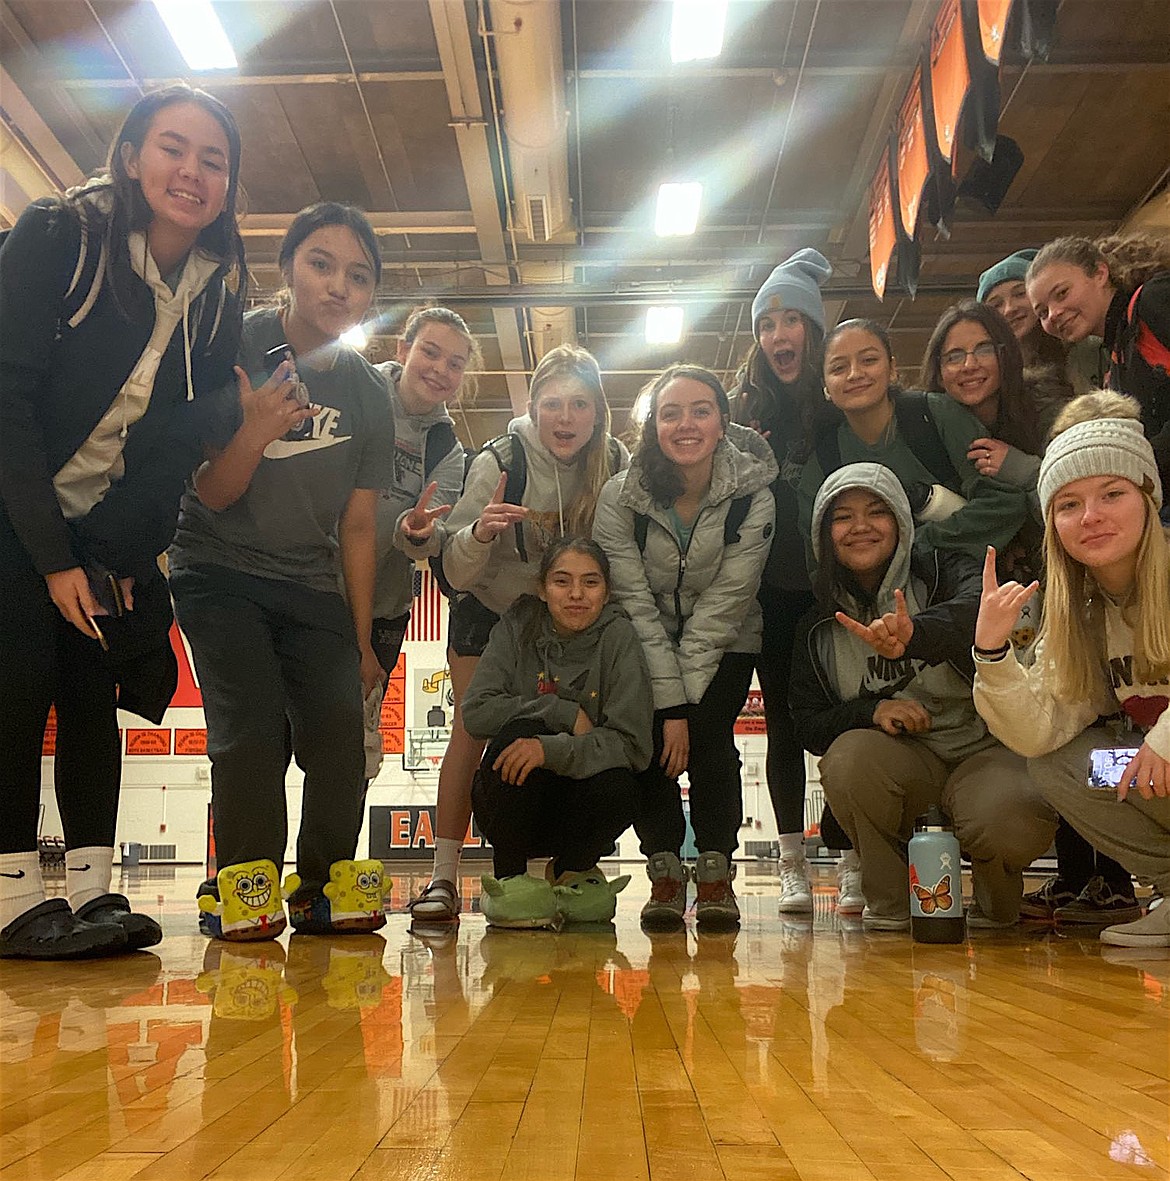 The Ronan Maidens prepped for three games at the Alaska Airlines Classic in Anchorage. (Ronan Basketball Photo)